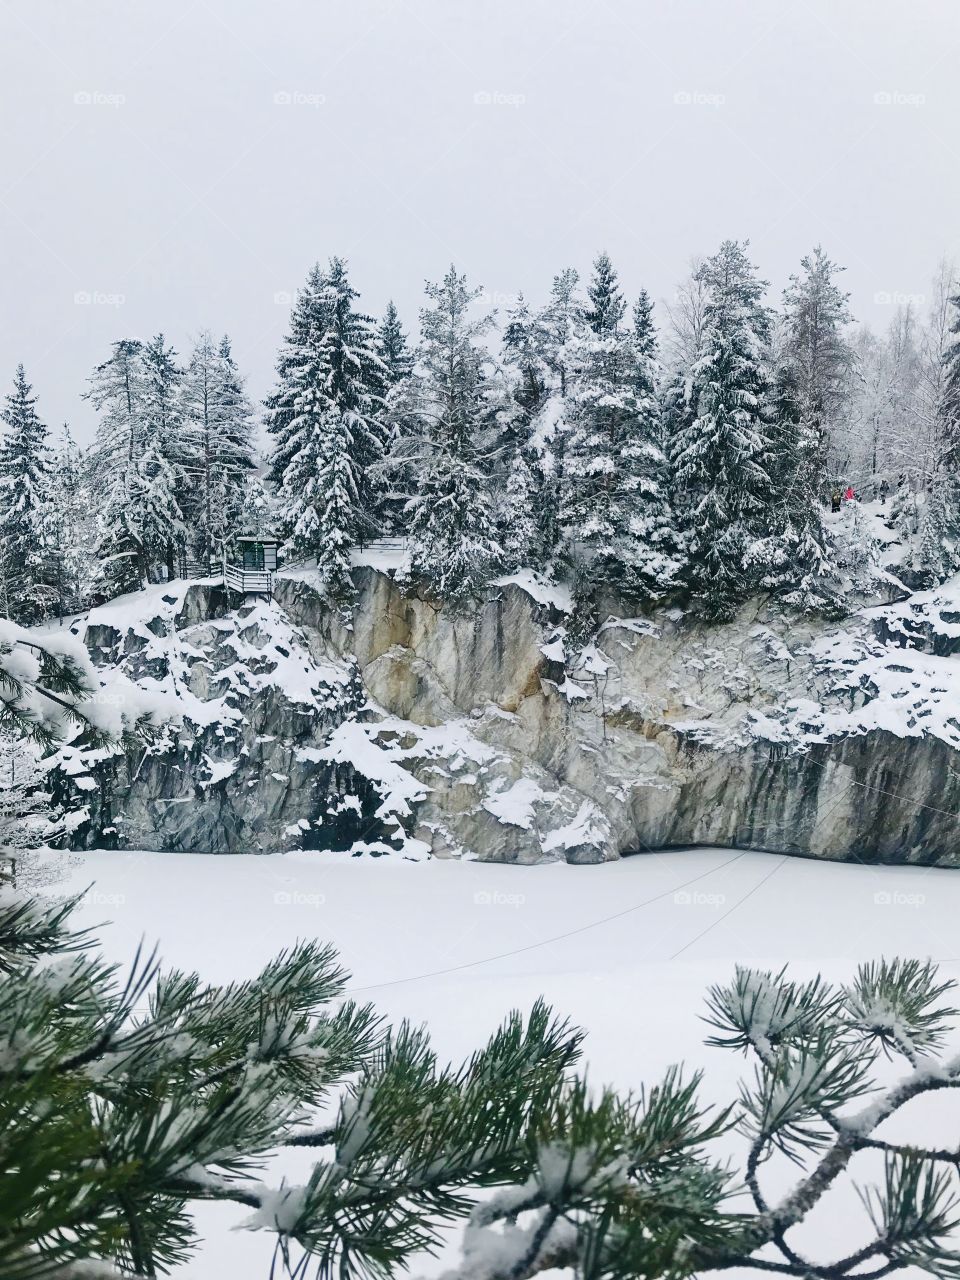 The Ruskeala Mountain Park is a tourist complex located in the Sortavalsky district of the Republic of Karelia. The basis of the complex is a cultural heritage object, a historical monument - a former marble quarry filled with groundwater.